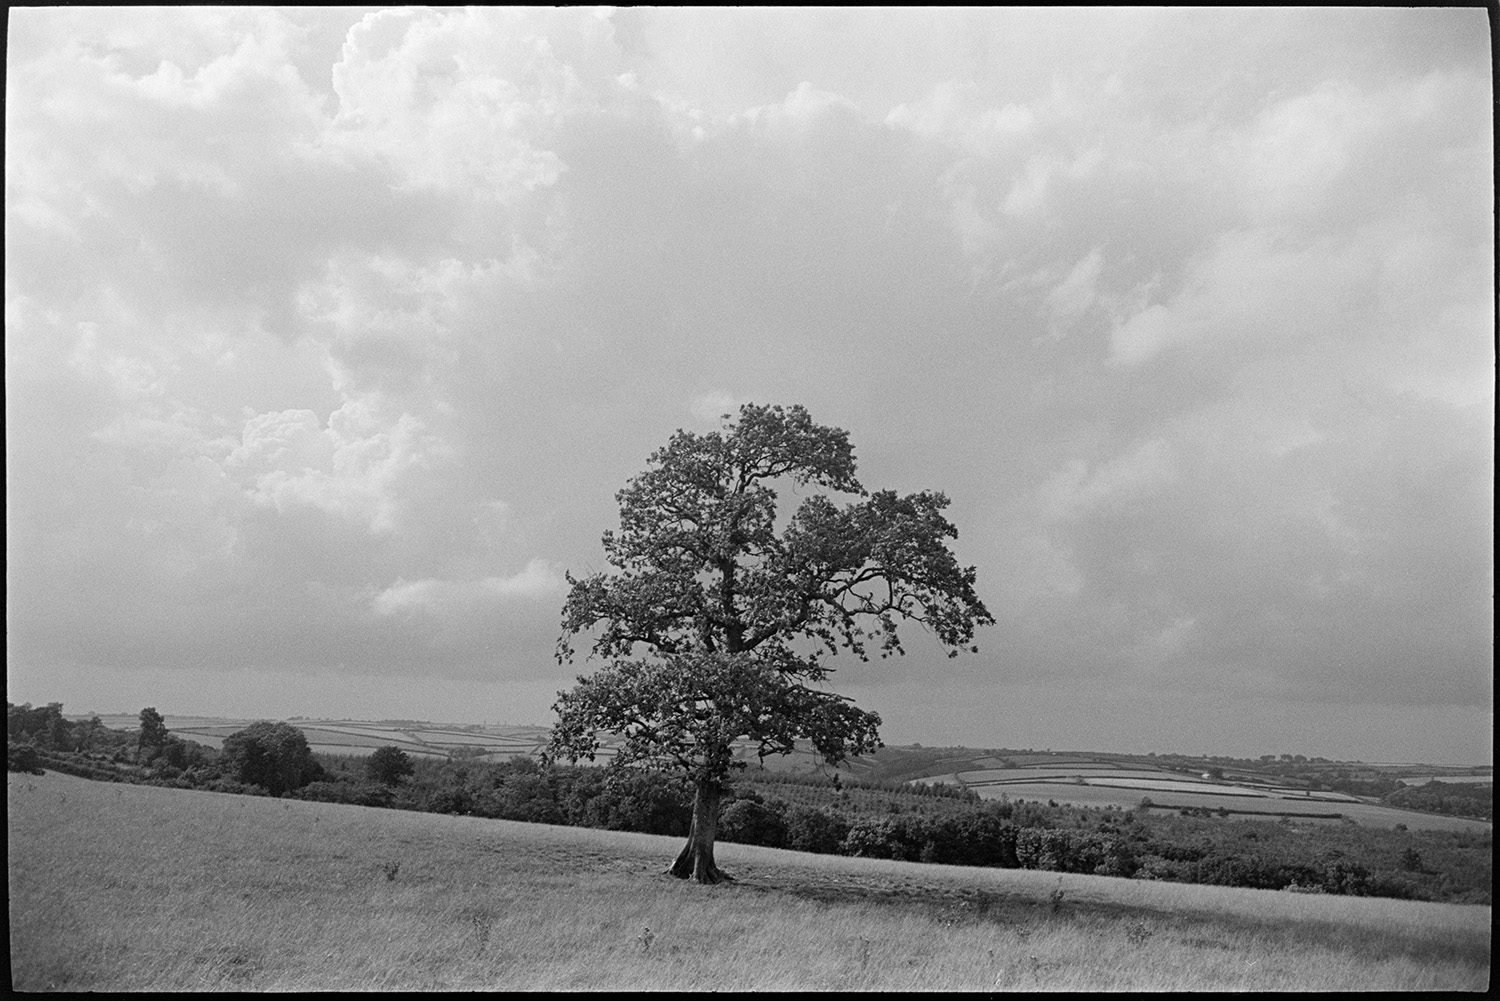 Lone tree in landscape with stormy clouds. 
[A tree in a field at Ashreigney with clouds in the sky above. A landscape of fields, woodland and hedgerows can be seen in the background.]